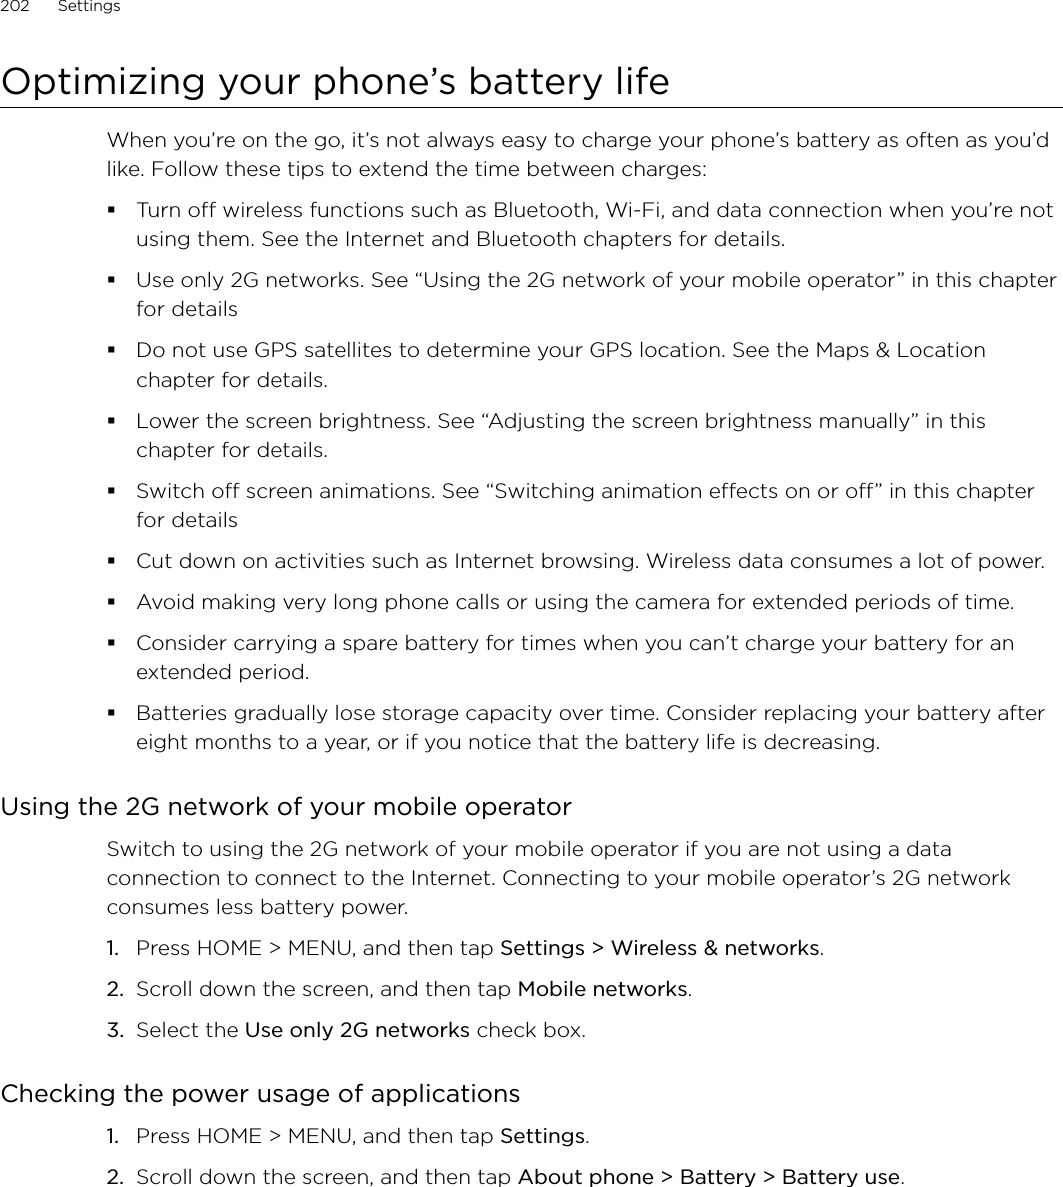 202      Settings      Optimizing your phone’s battery lifeWhen you’re on the go, it’s not always easy to charge your phone’s battery as often as you’d like. Follow these tips to extend the time between charges: Turn off wireless functions such as Bluetooth, Wi-Fi, and data connection when you’re not using them. See the Internet and Bluetooth chapters for details.Use only 2G networks. See “Using the 2G network of your mobile operator” in this chapter for detailsDo not use GPS satellites to determine your GPS location. See the Maps &amp; Location chapter for details. Lower the screen brightness. See “Adjusting the screen brightness manually” in this chapter for details.Switch off screen animations. See “Switching animation effects on or off” in this chapter for detailsCut down on activities such as Internet browsing. Wireless data consumes a lot of power.Avoid making very long phone calls or using the camera for extended periods of time.Consider carrying a spare battery for times when you can’t charge your battery for an extended period.Batteries gradually lose storage capacity over time. Consider replacing your battery after eight months to a year, or if you notice that the battery life is decreasing.Using the 2G network of your mobile operatorSwitch to using the 2G network of your mobile operator if you are not using a data connection to connect to the Internet. Connecting to your mobile operator’s 2G network consumes less battery power. Press HOME &gt; MENU, and then tap Settings &gt; Wireless &amp; networks.Scroll down the screen, and then tap Mobile networks.Select the Use only 2G networks check box. Checking the power usage of applicationsPress HOME &gt; MENU, and then tap Settings.Scroll down the screen, and then tap About phone &gt; Battery &gt; Battery use.1.2.3.1.2.